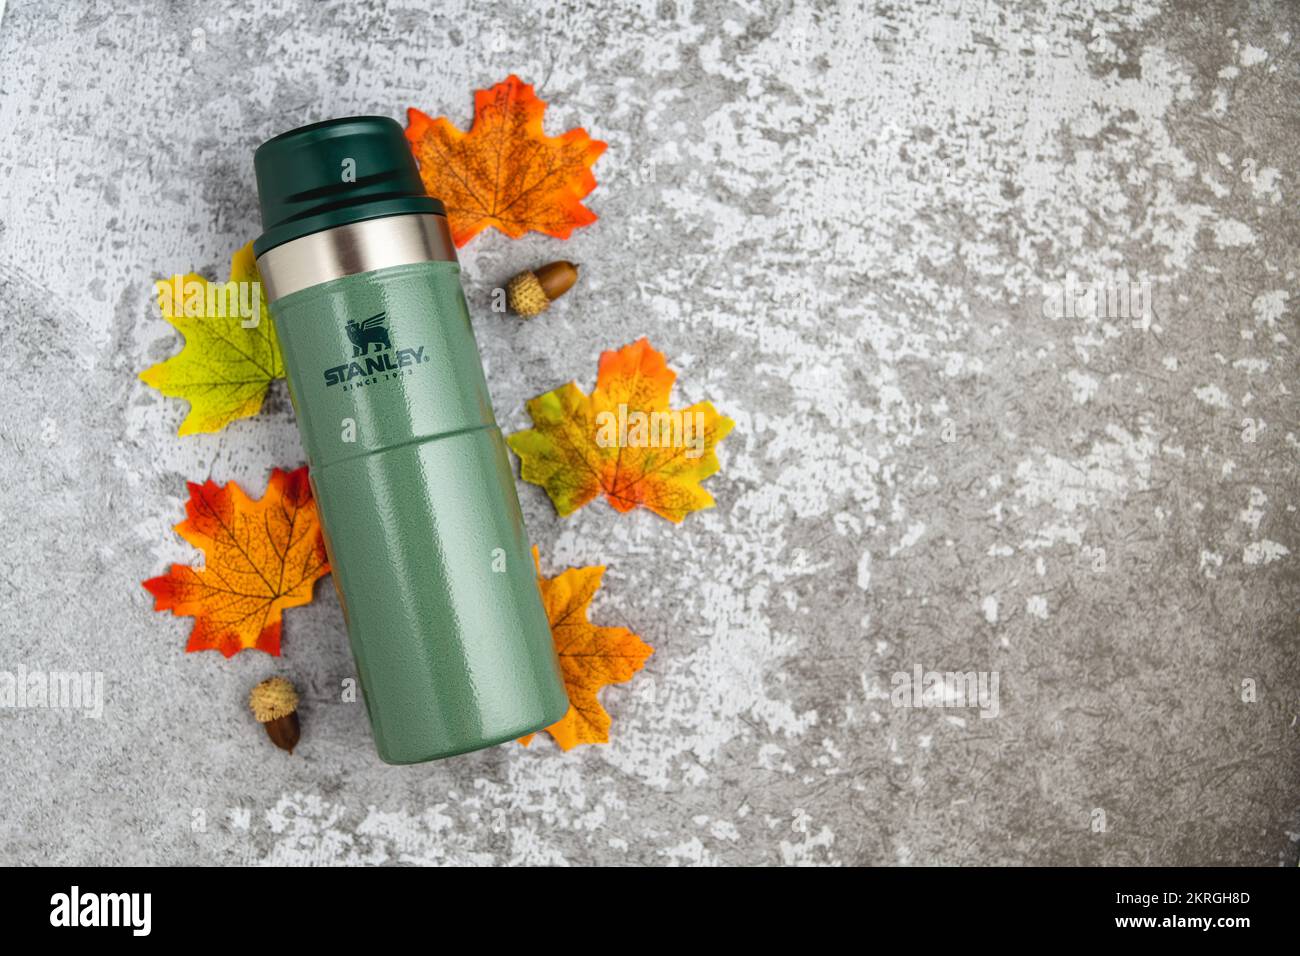 Blue Plastic Thermos Flask And Cup On White Background Stock Photo - Alamy